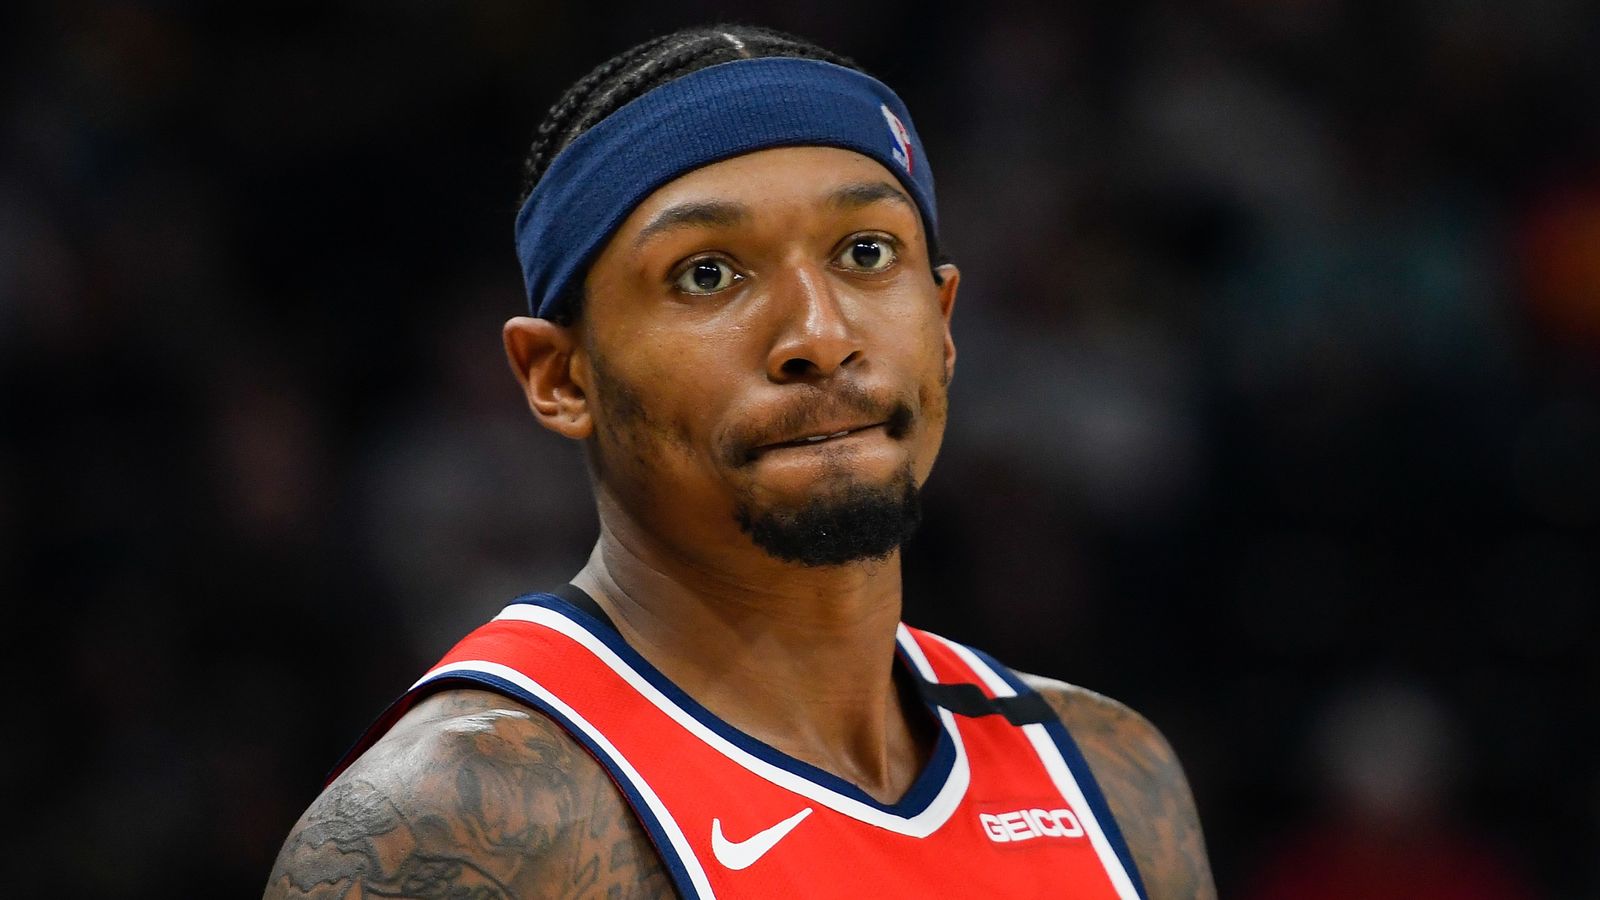 Bradley Beal 'frustrated' after Wizards miss playoffs again